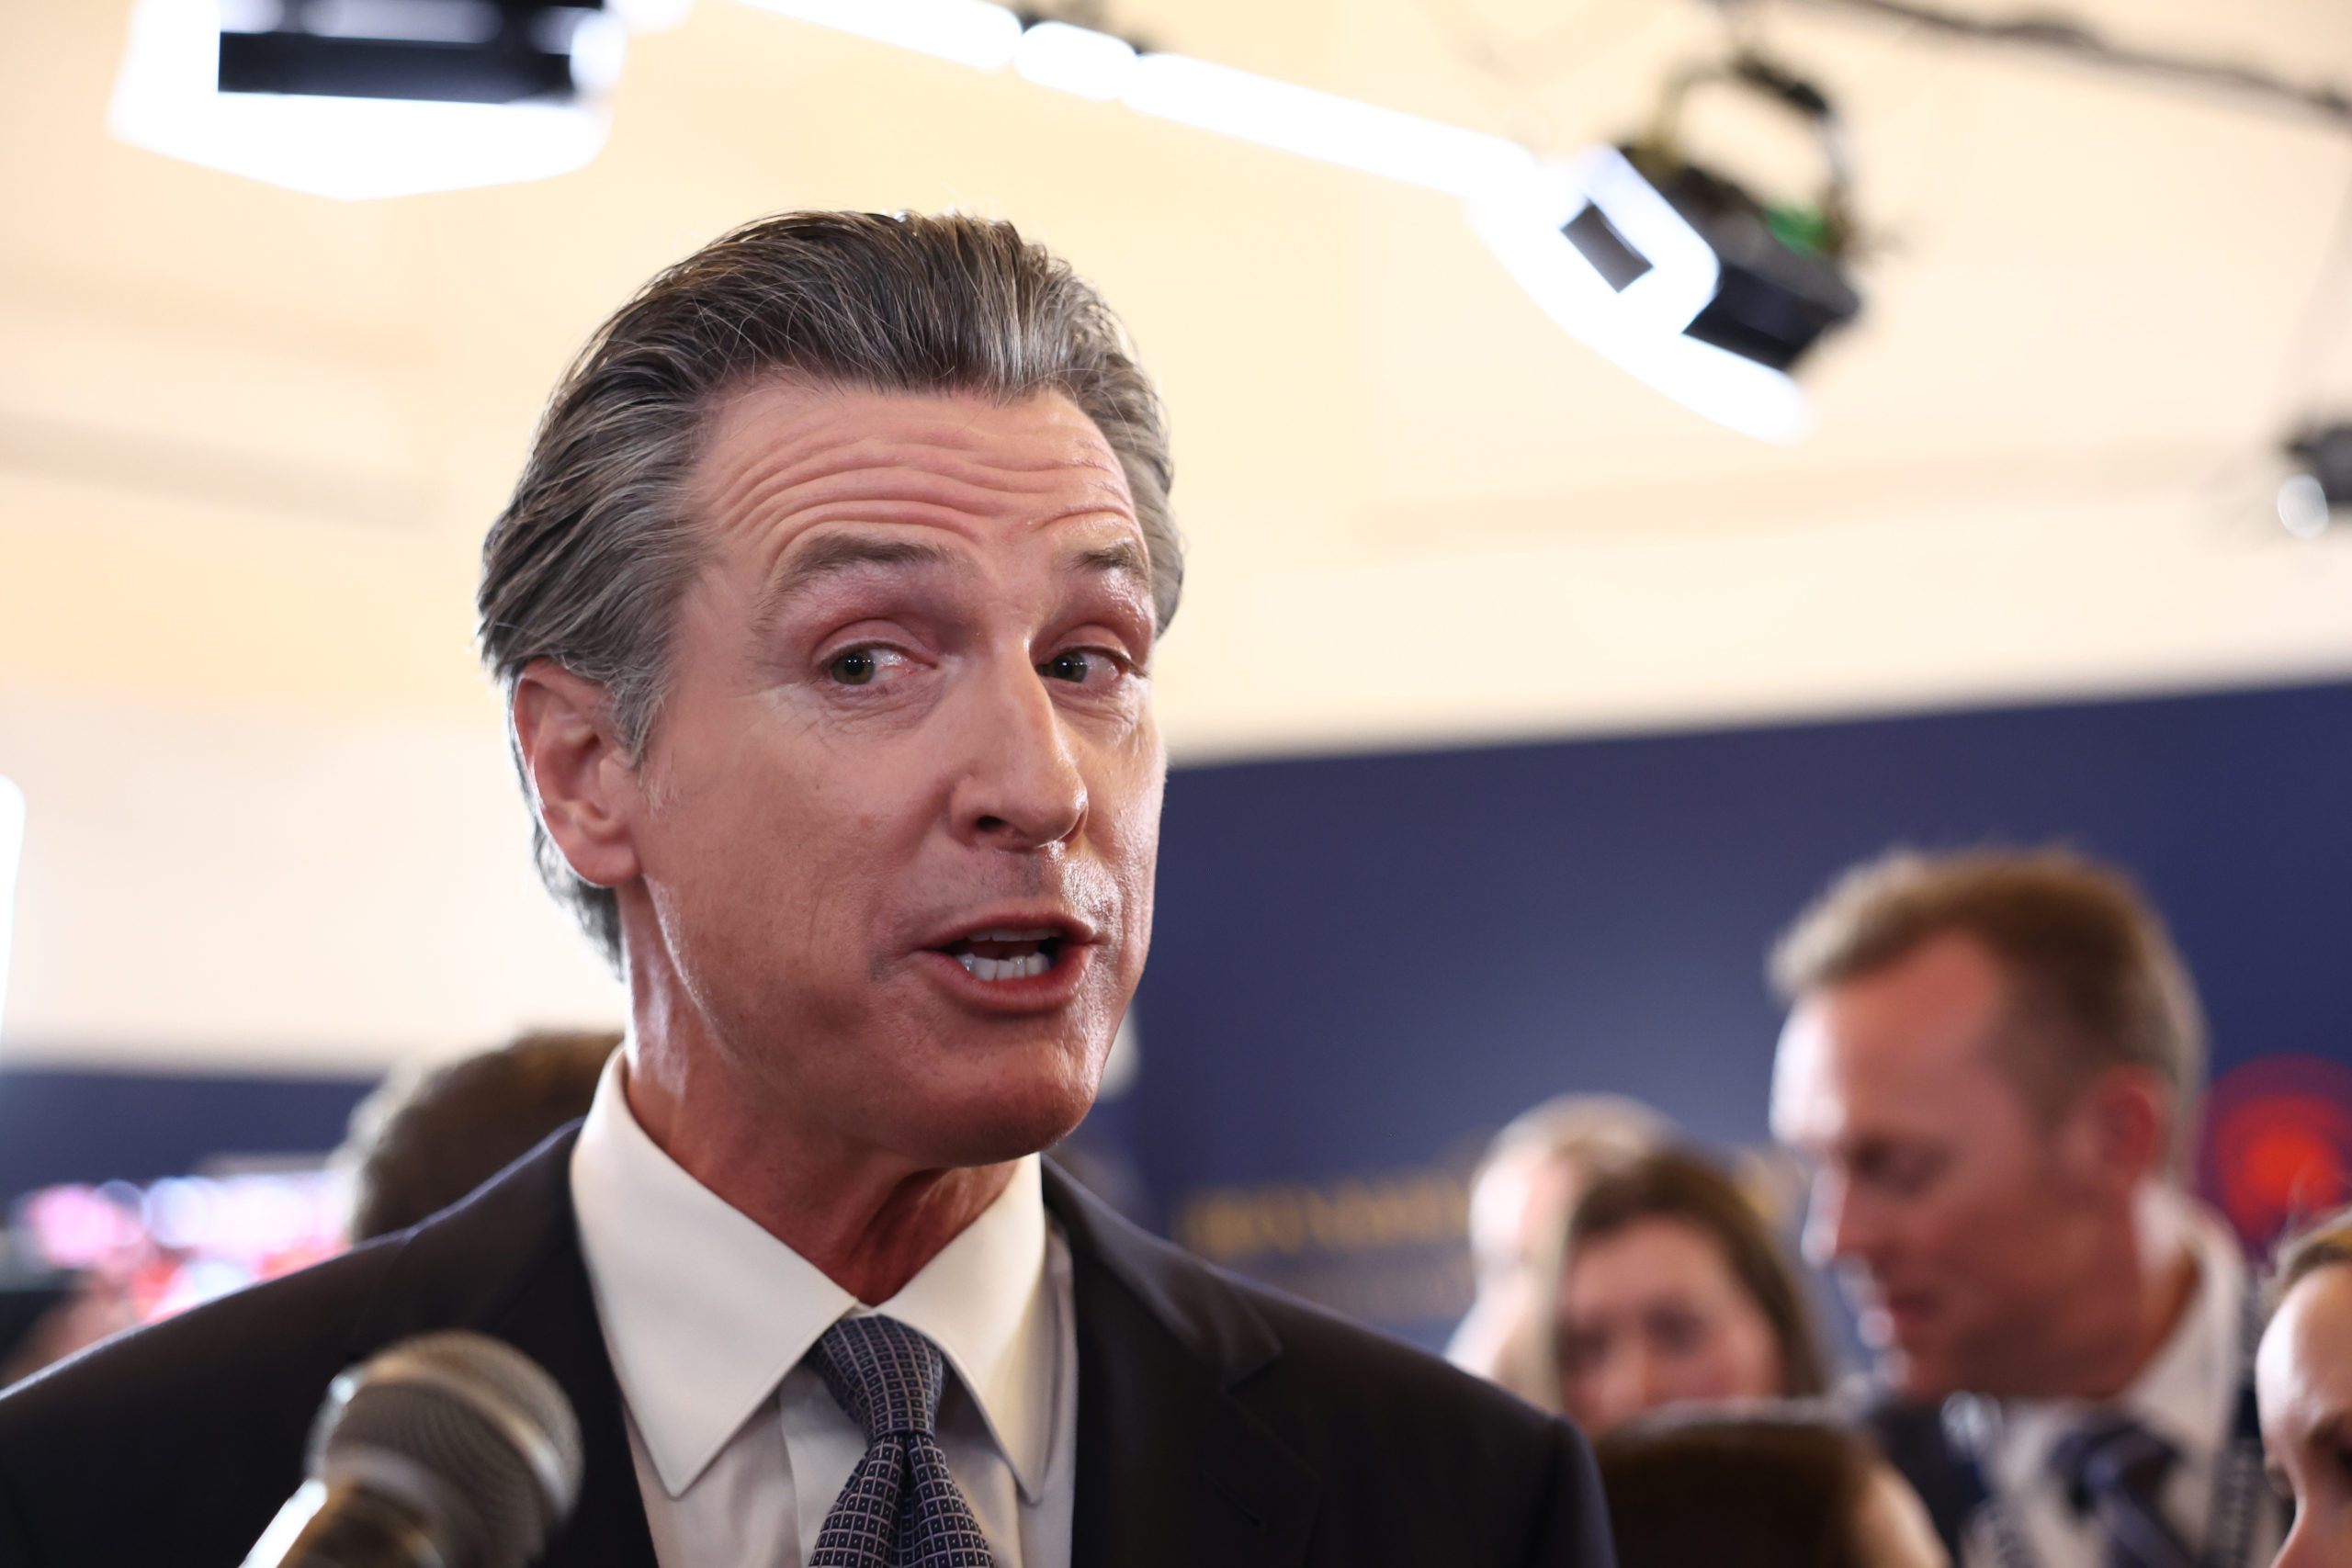 SIMI VALLEY, CALIFORNIA - SEPTEMBER 27: California Gov. Gavin Newsom talks to reporters in the spin room following the FOX Business Republican Primary Debate at the Ronald Reagan Presidential Library on September 27, 2023 in Simi Valley, California. Seven presidential hopefuls squared off in the second Republican primary debate as former U.S. President Donald Trump, currently facing indictments in four locations, declined again to participate. (Photo by Mario Tama/Getty Images)